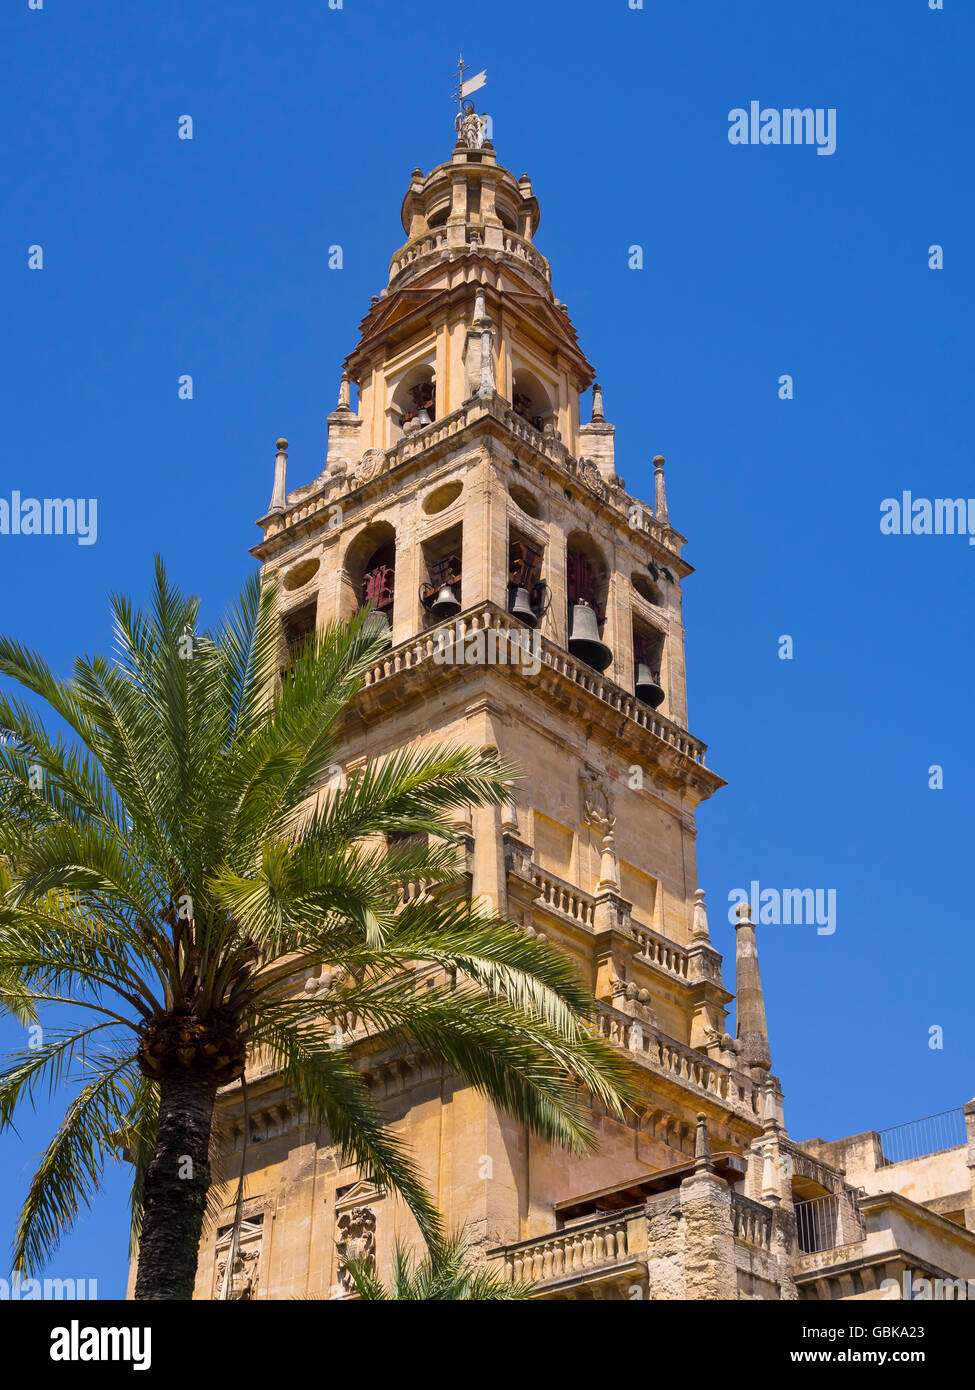 Belfry of the Cathedral, Mezquita, Cordoba province, Andalusia, Spain Stock Photo